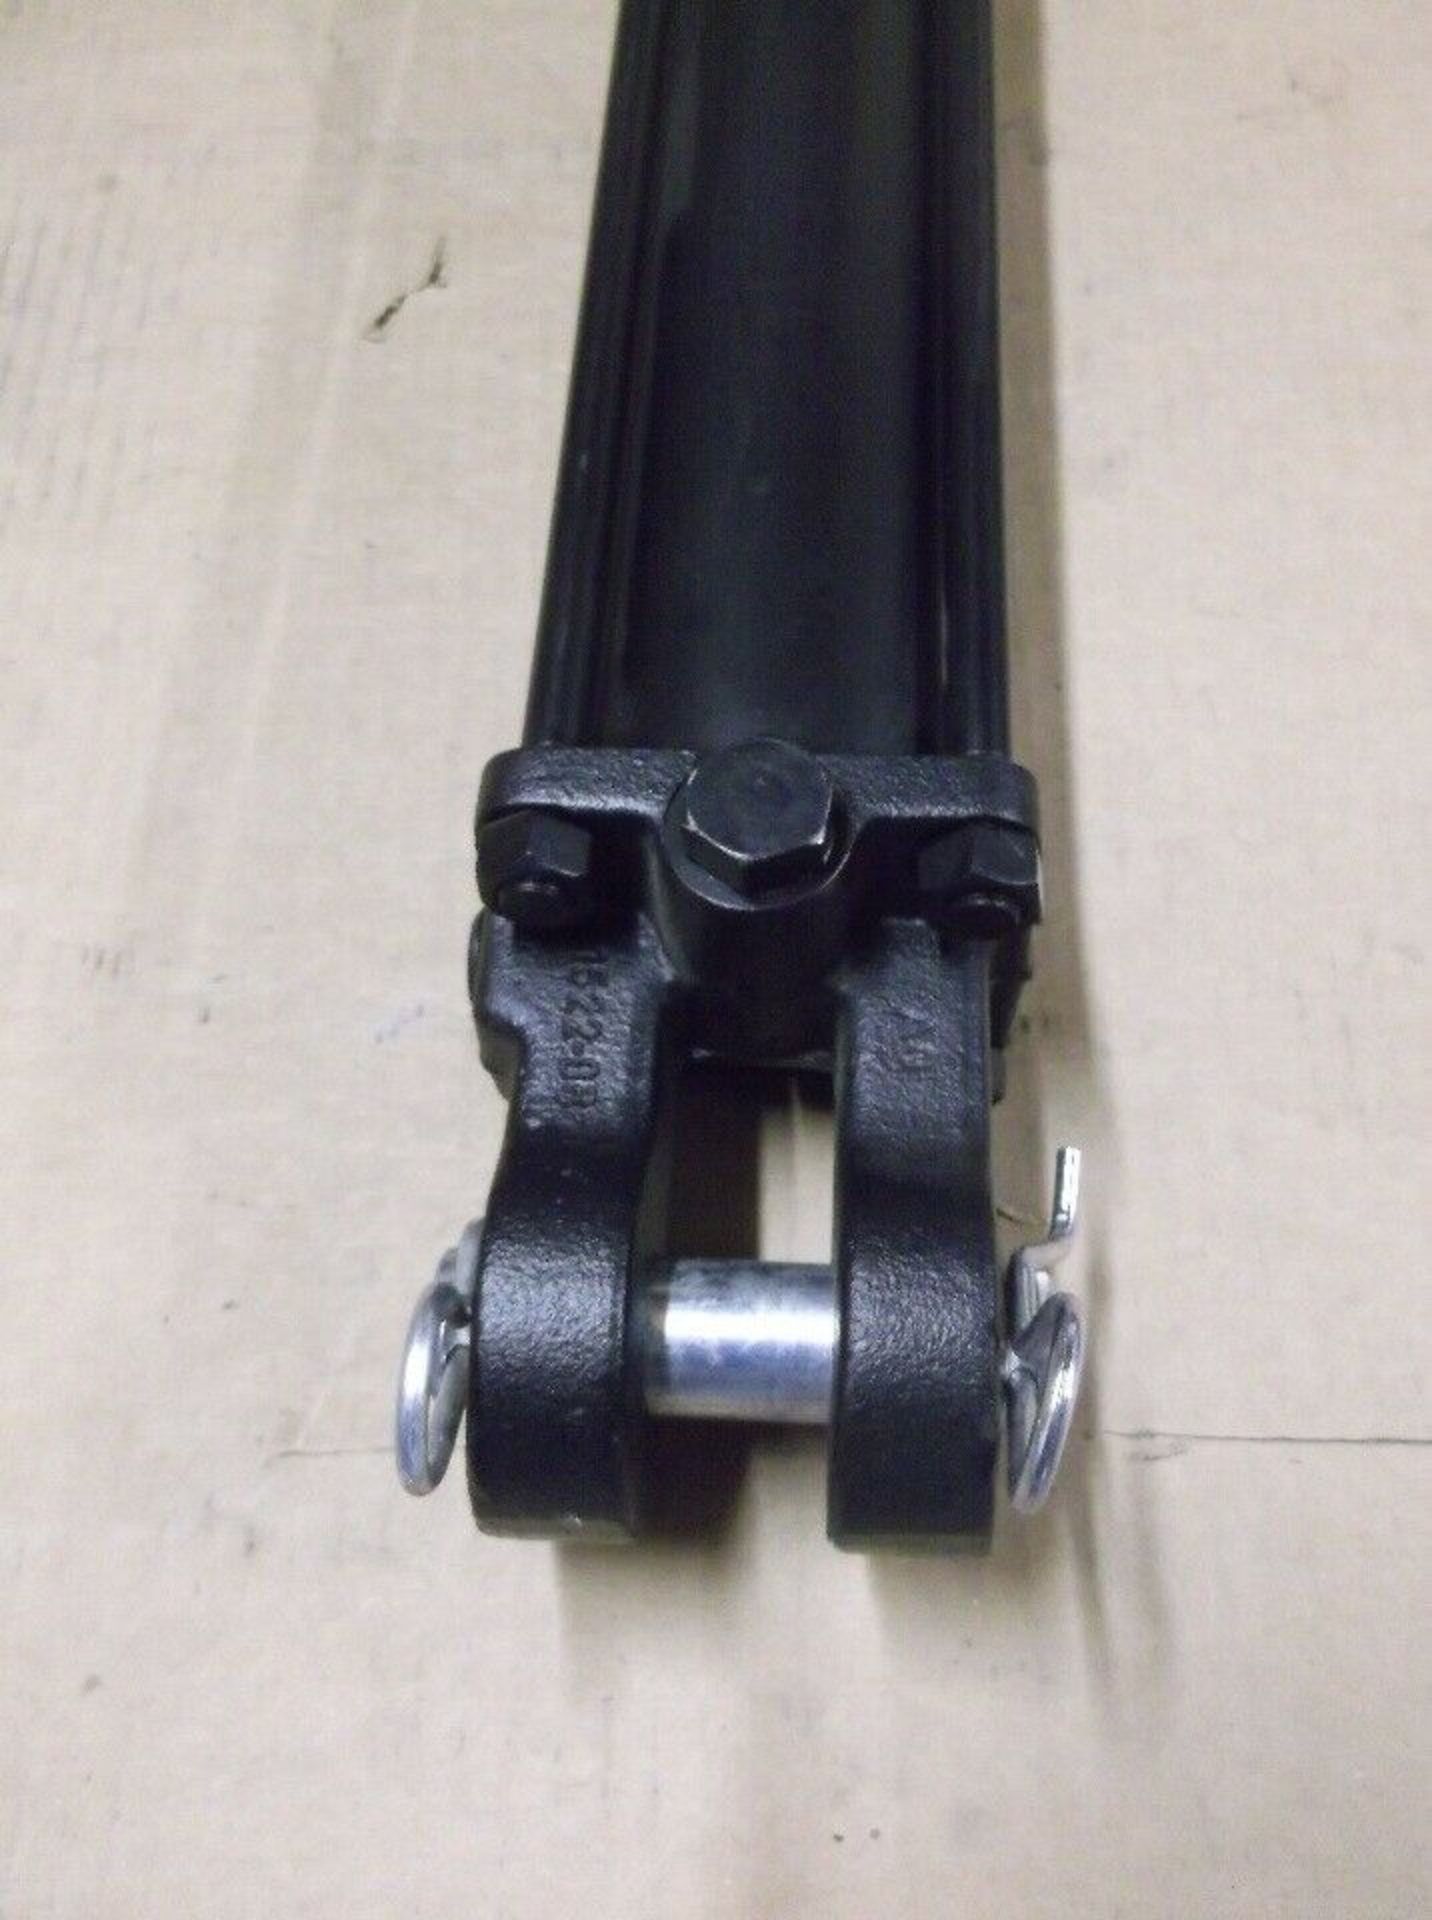 New Eaton Fieldmate Plus Agricultural Hydraulic Cylinder Model# 3024-FMH, 24" Stroke, 3" Bore, Ram D - Image 4 of 4